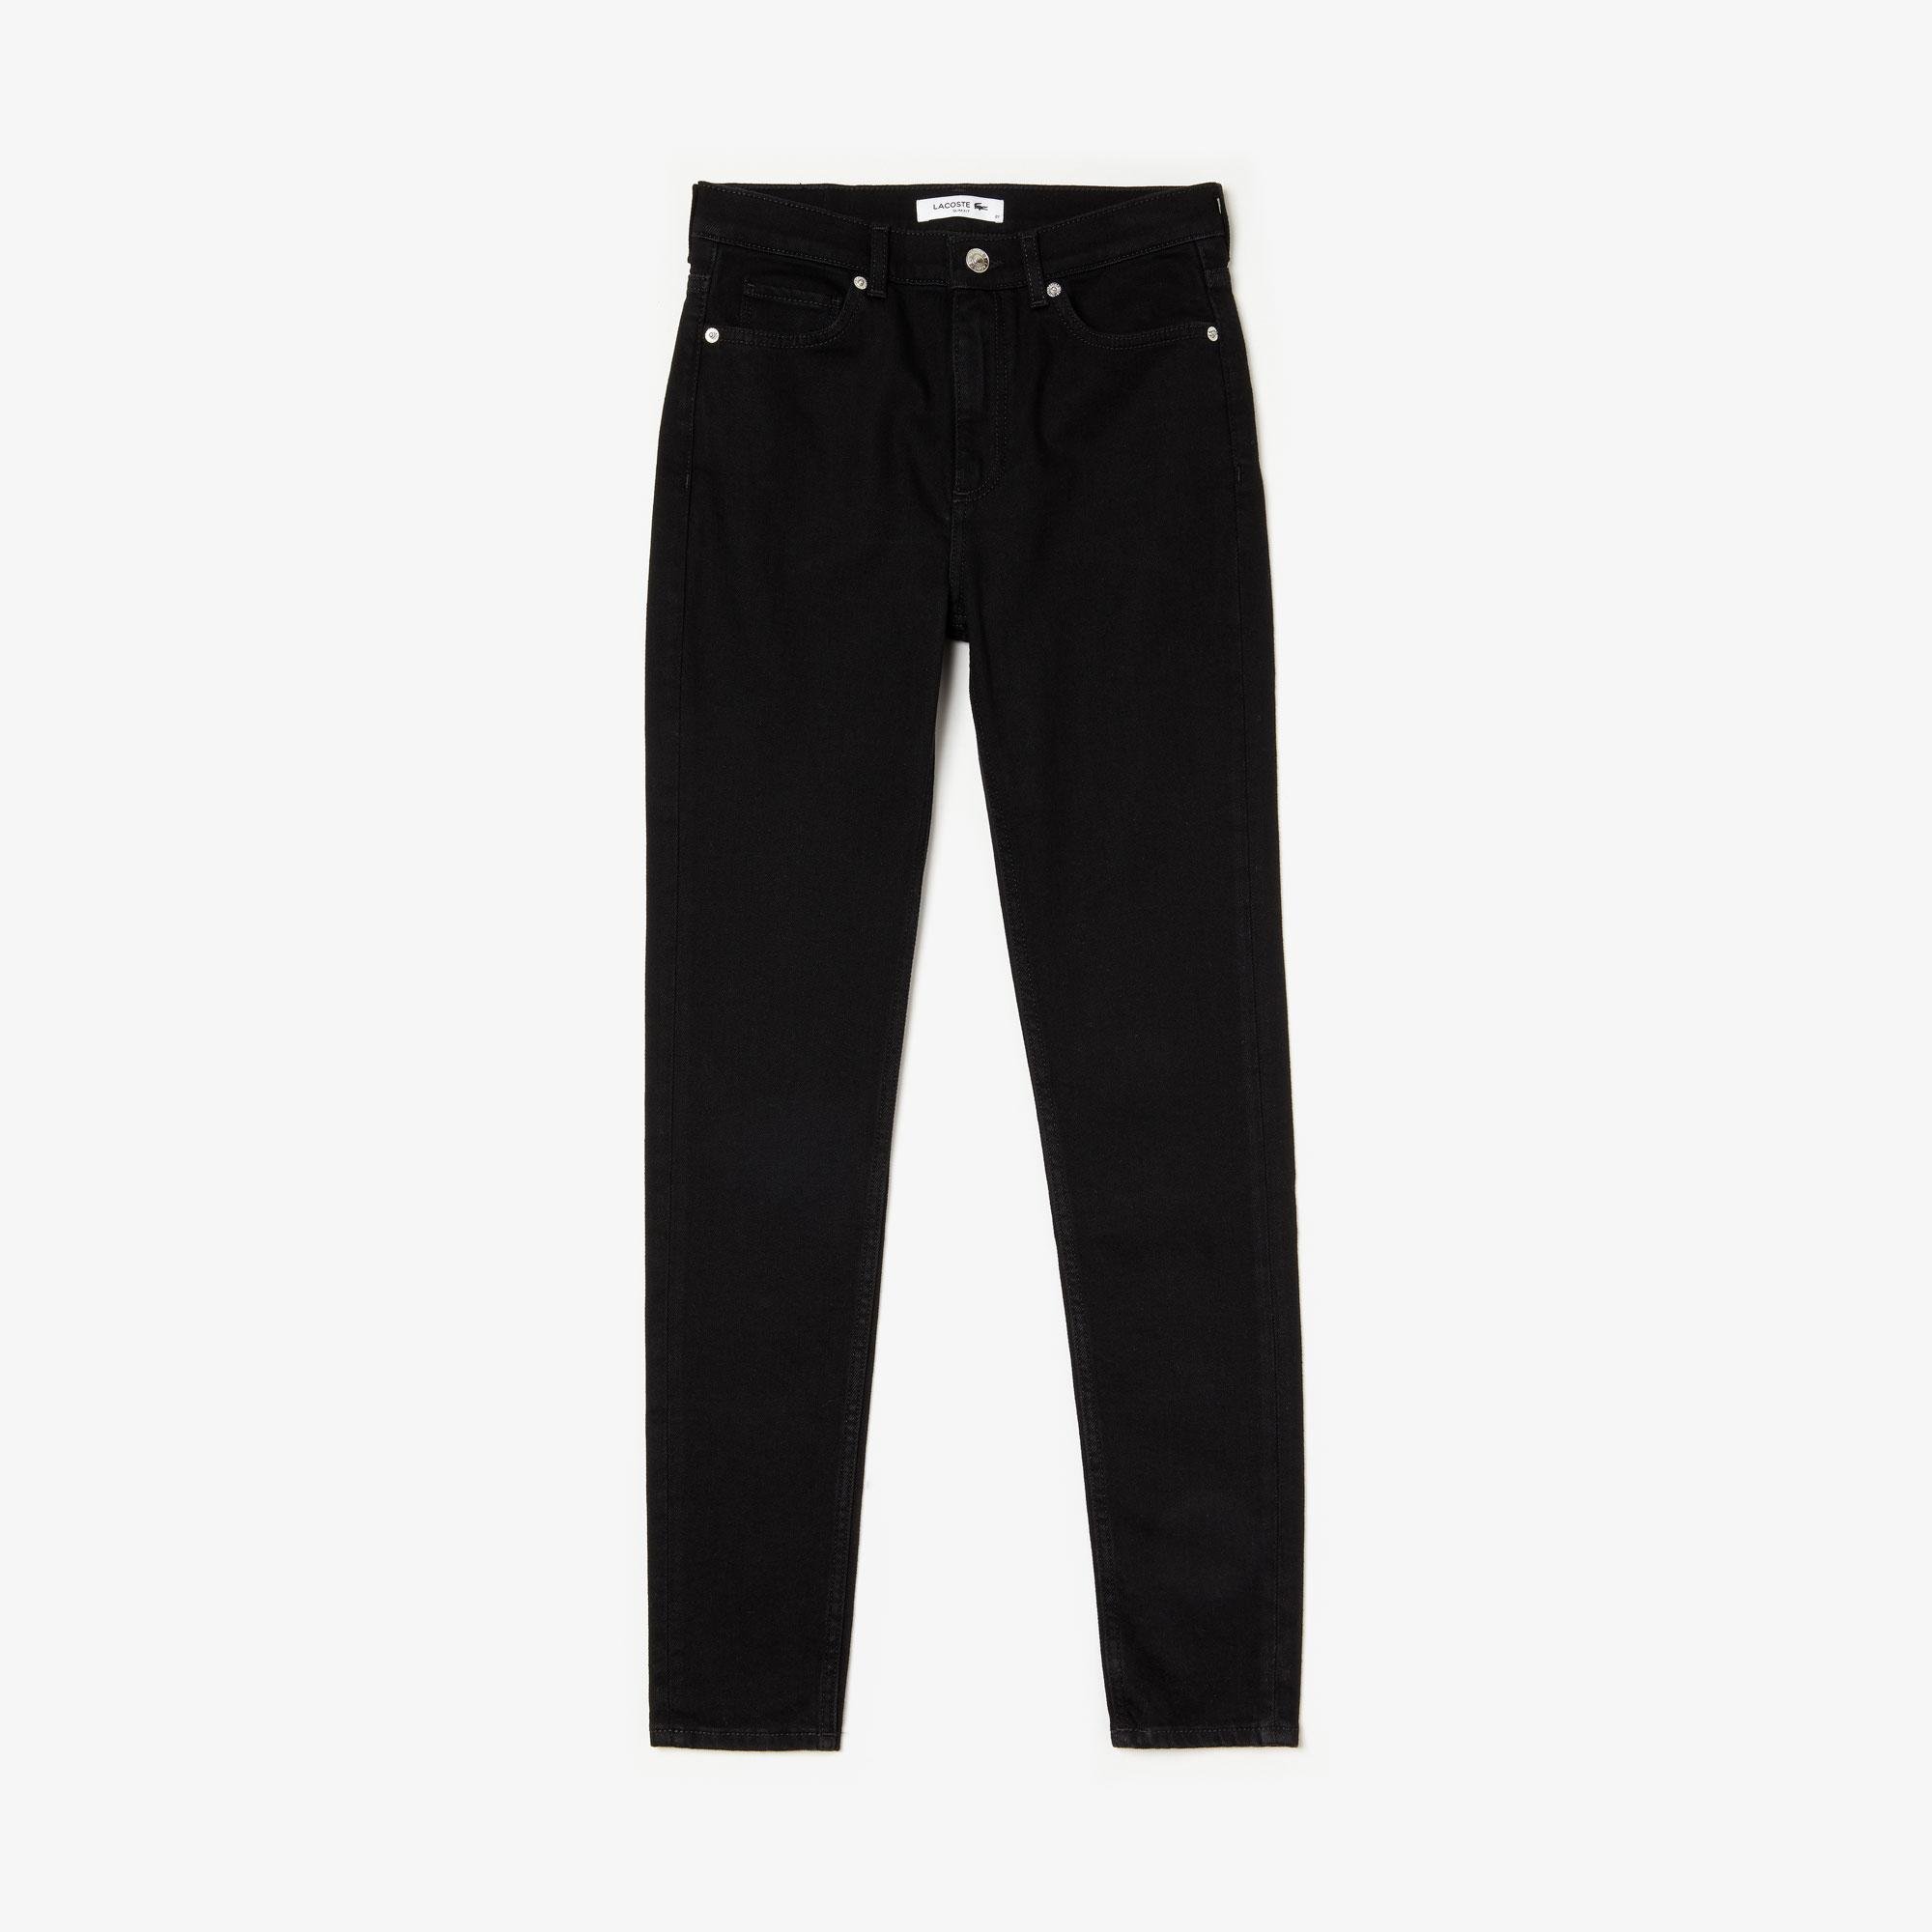 Lacoste Women's Skinny Fit Jeans in Stretch Cotton